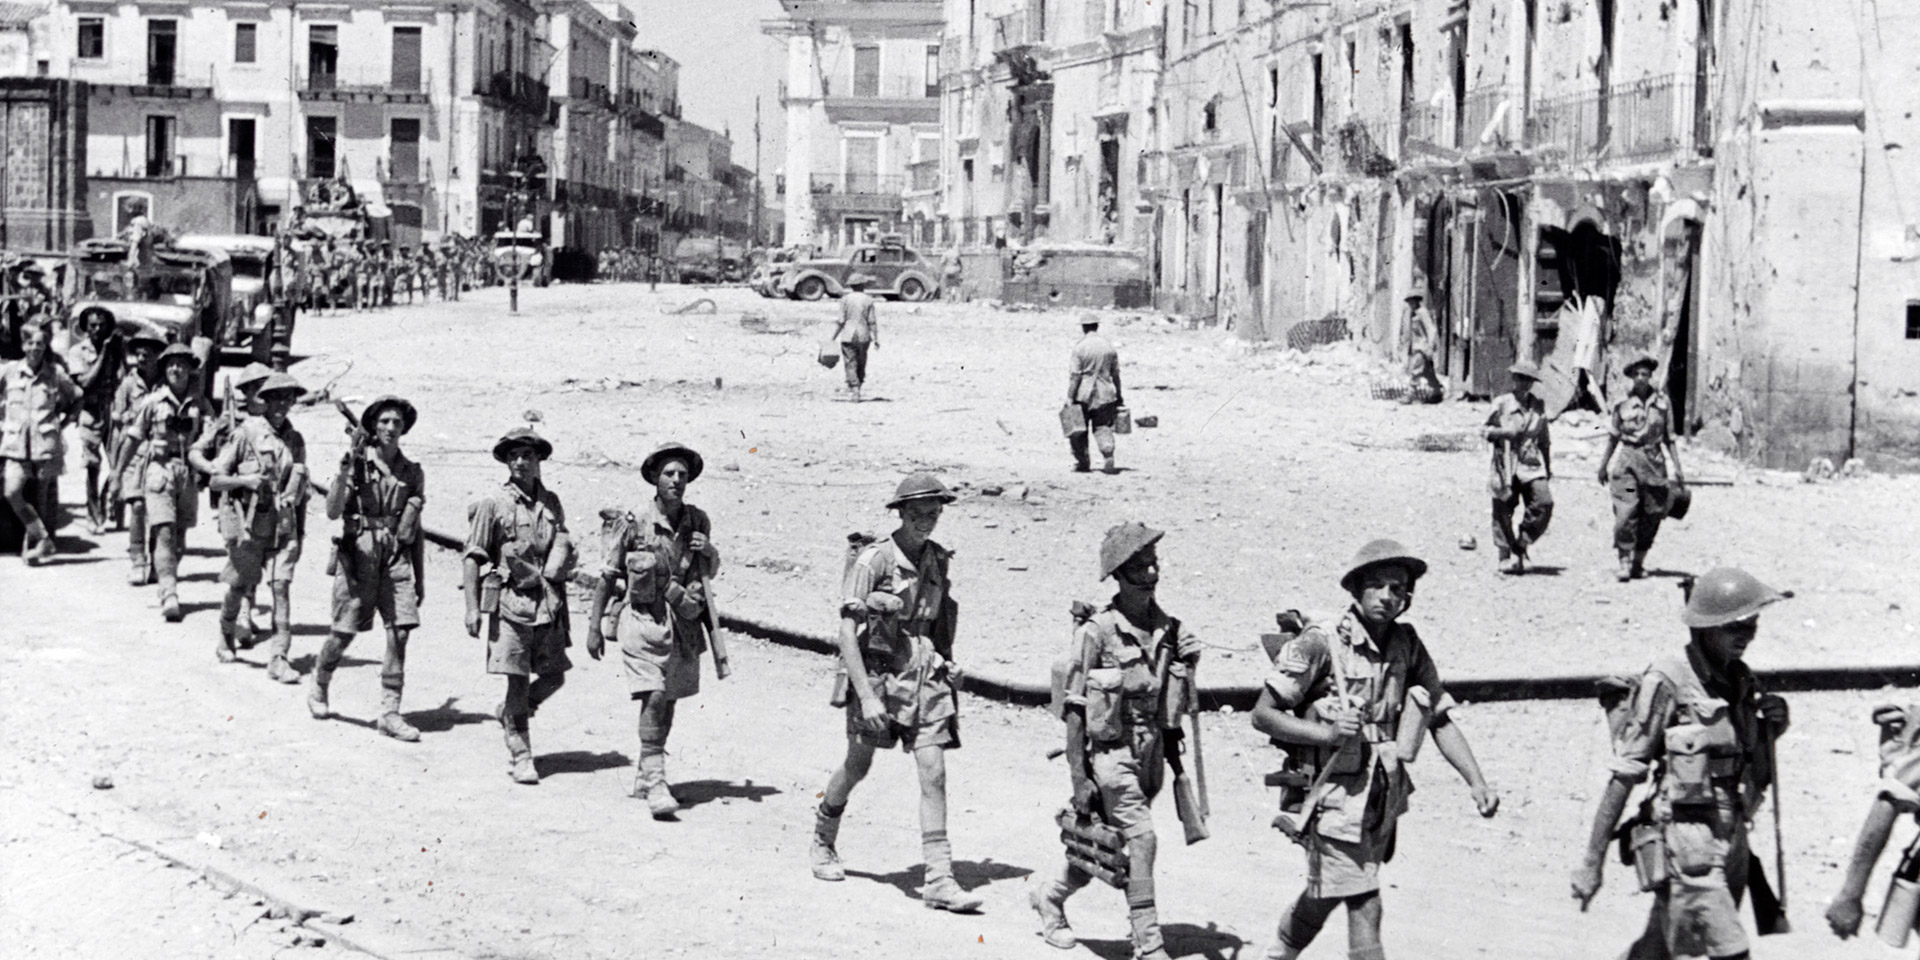 Men from the 5th Battalion, The Northamptonshire Regiment, entering the town of Adrano, Sicily, August 1943